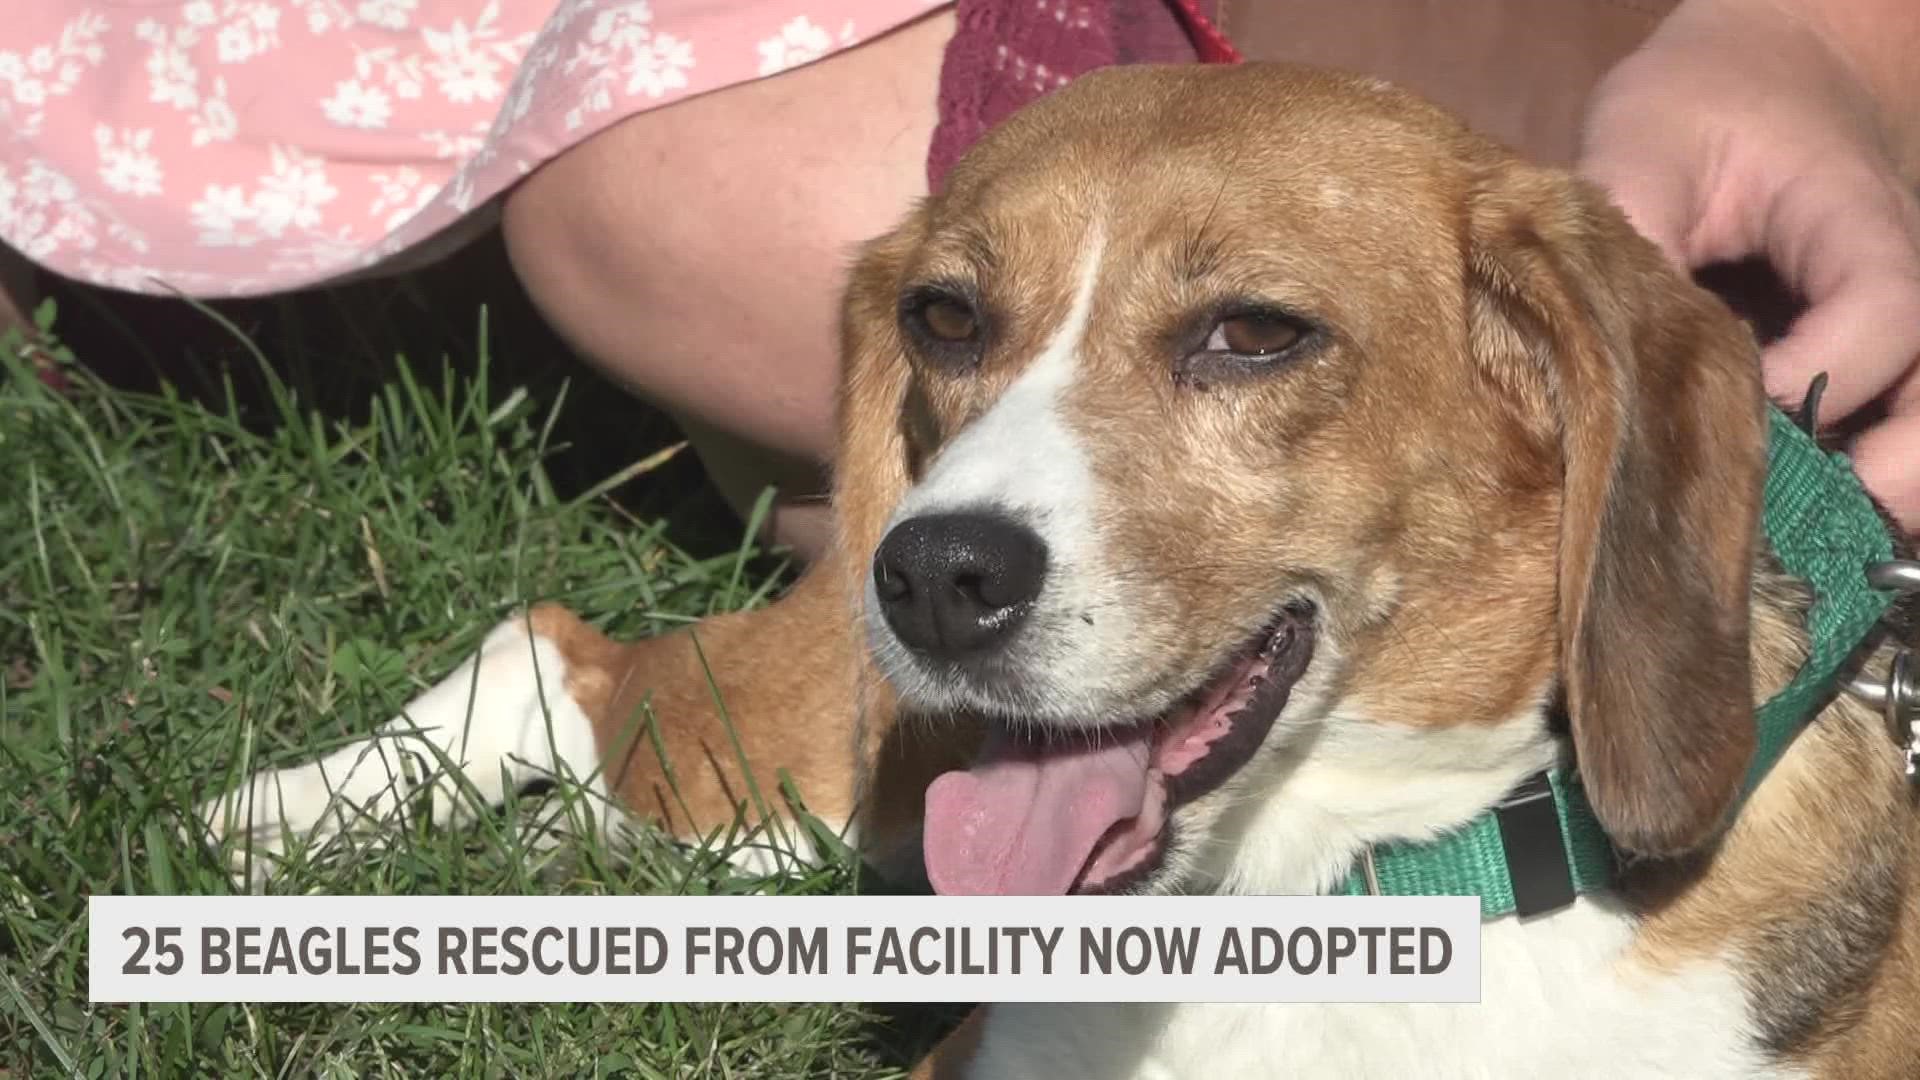 One of the adopted dogs, Peggy Sue, arrived at her forever home a few weeks ago. Up until now, the five-year-old beagle didn't know what a leash was.